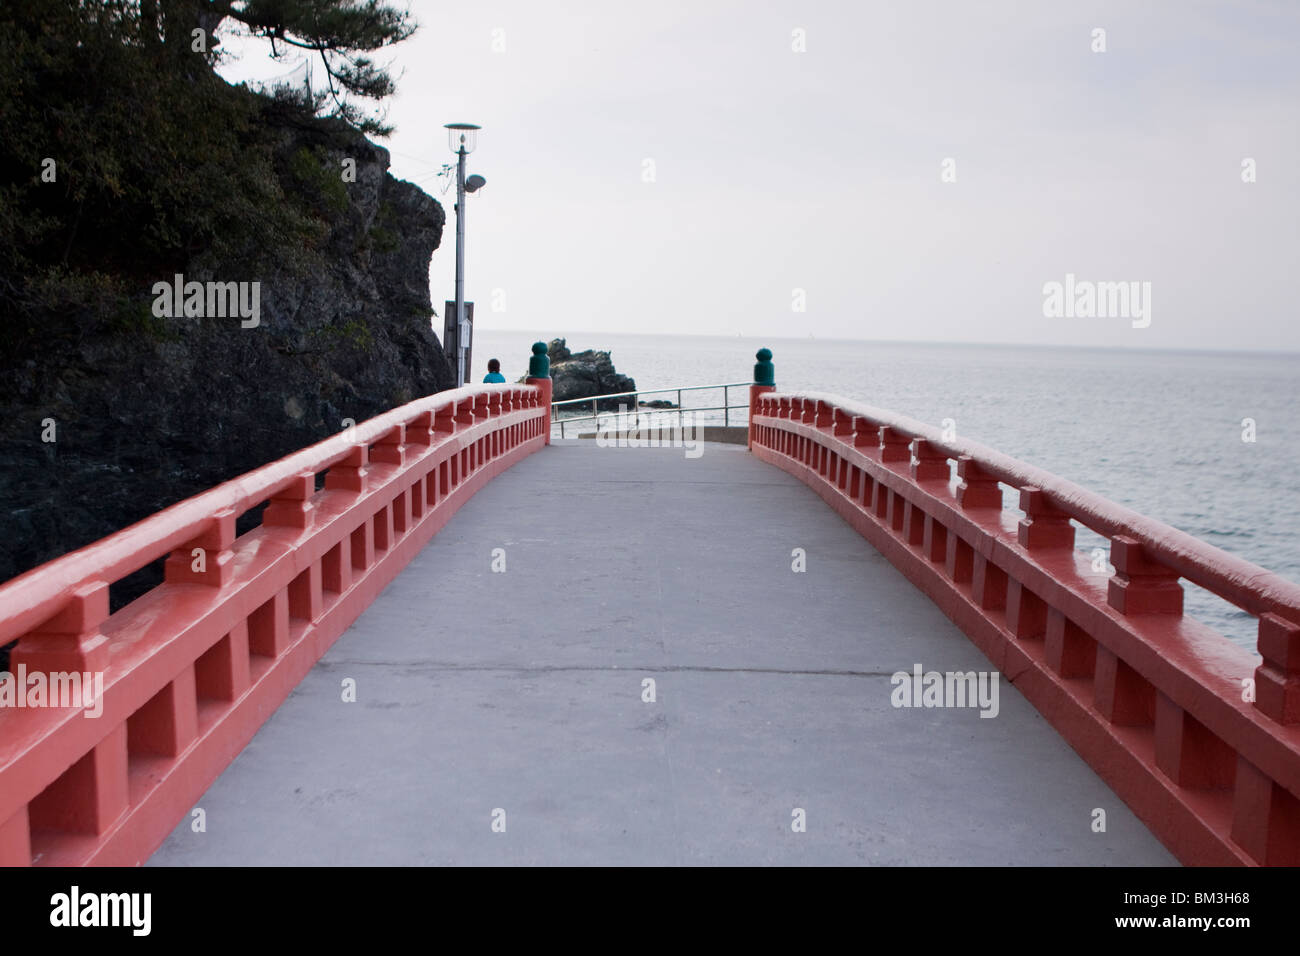 A traditional Japanese foot bridge at the Okitama Shrine by Meoto Iwa the wedded rock off Futami, Mie. Stock Photo